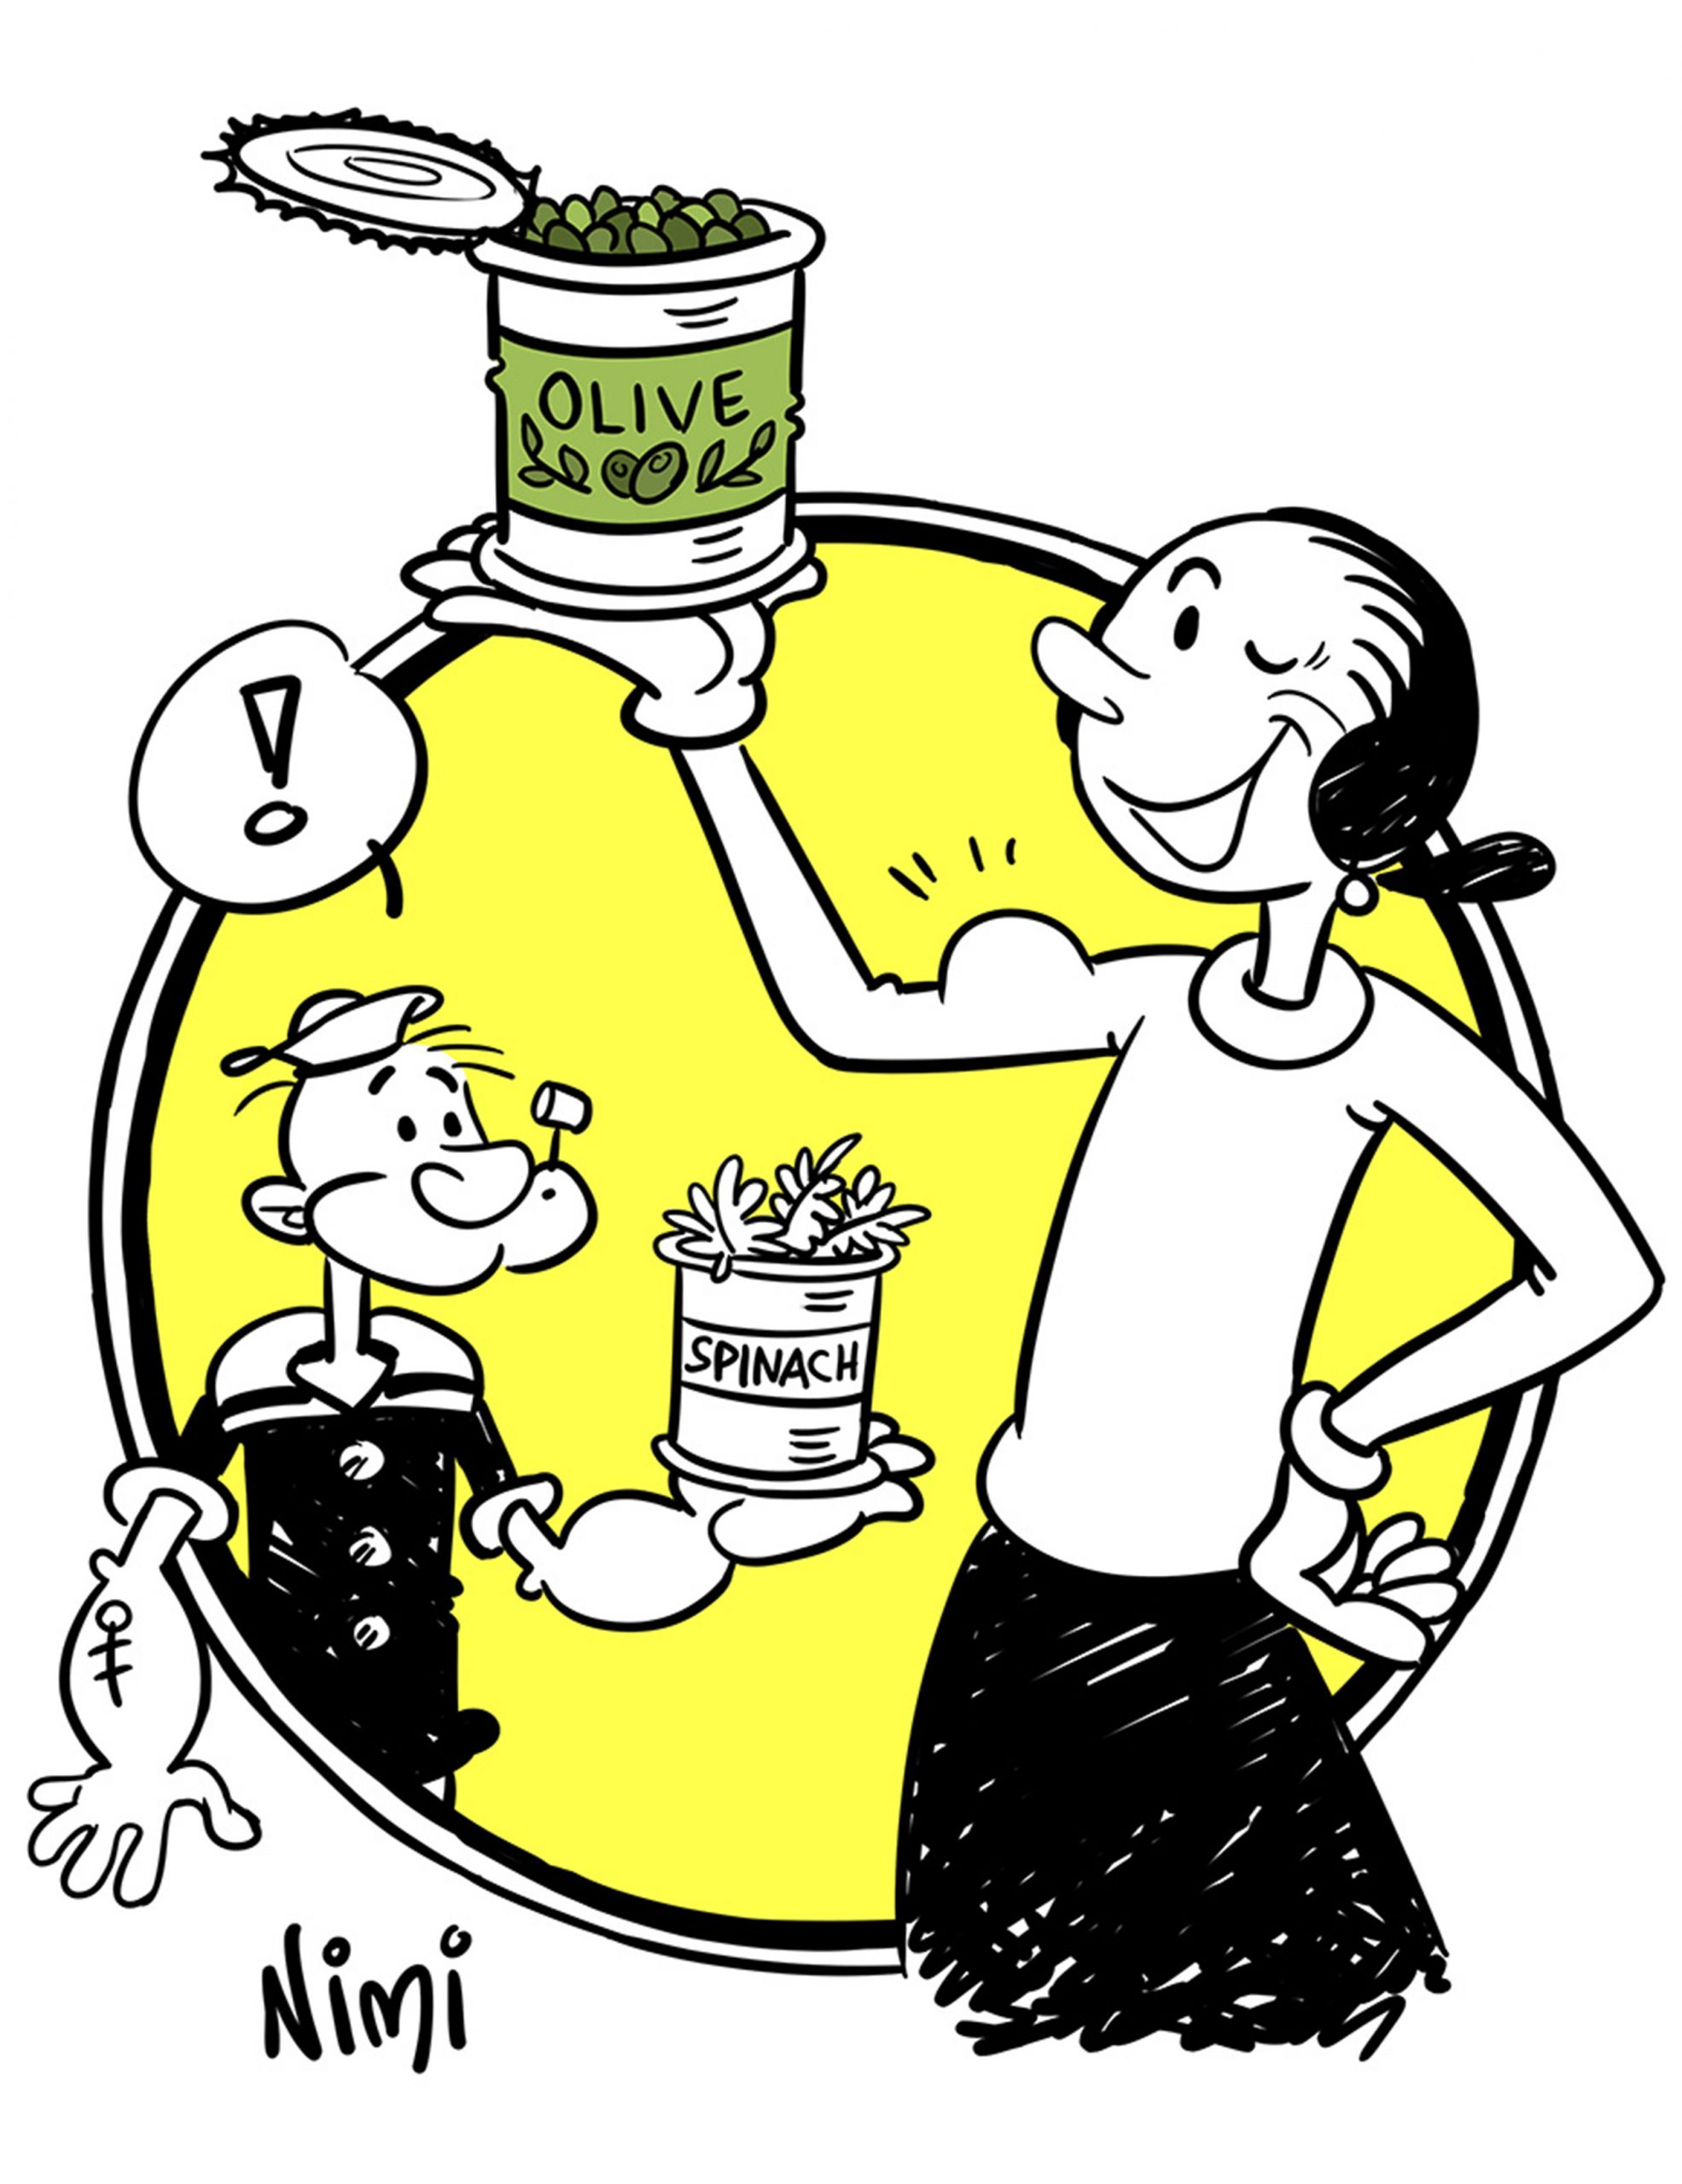 Olive Oyl Popeye the Sailor Man cartoon caricature spinach The Subjection of Women Feminist